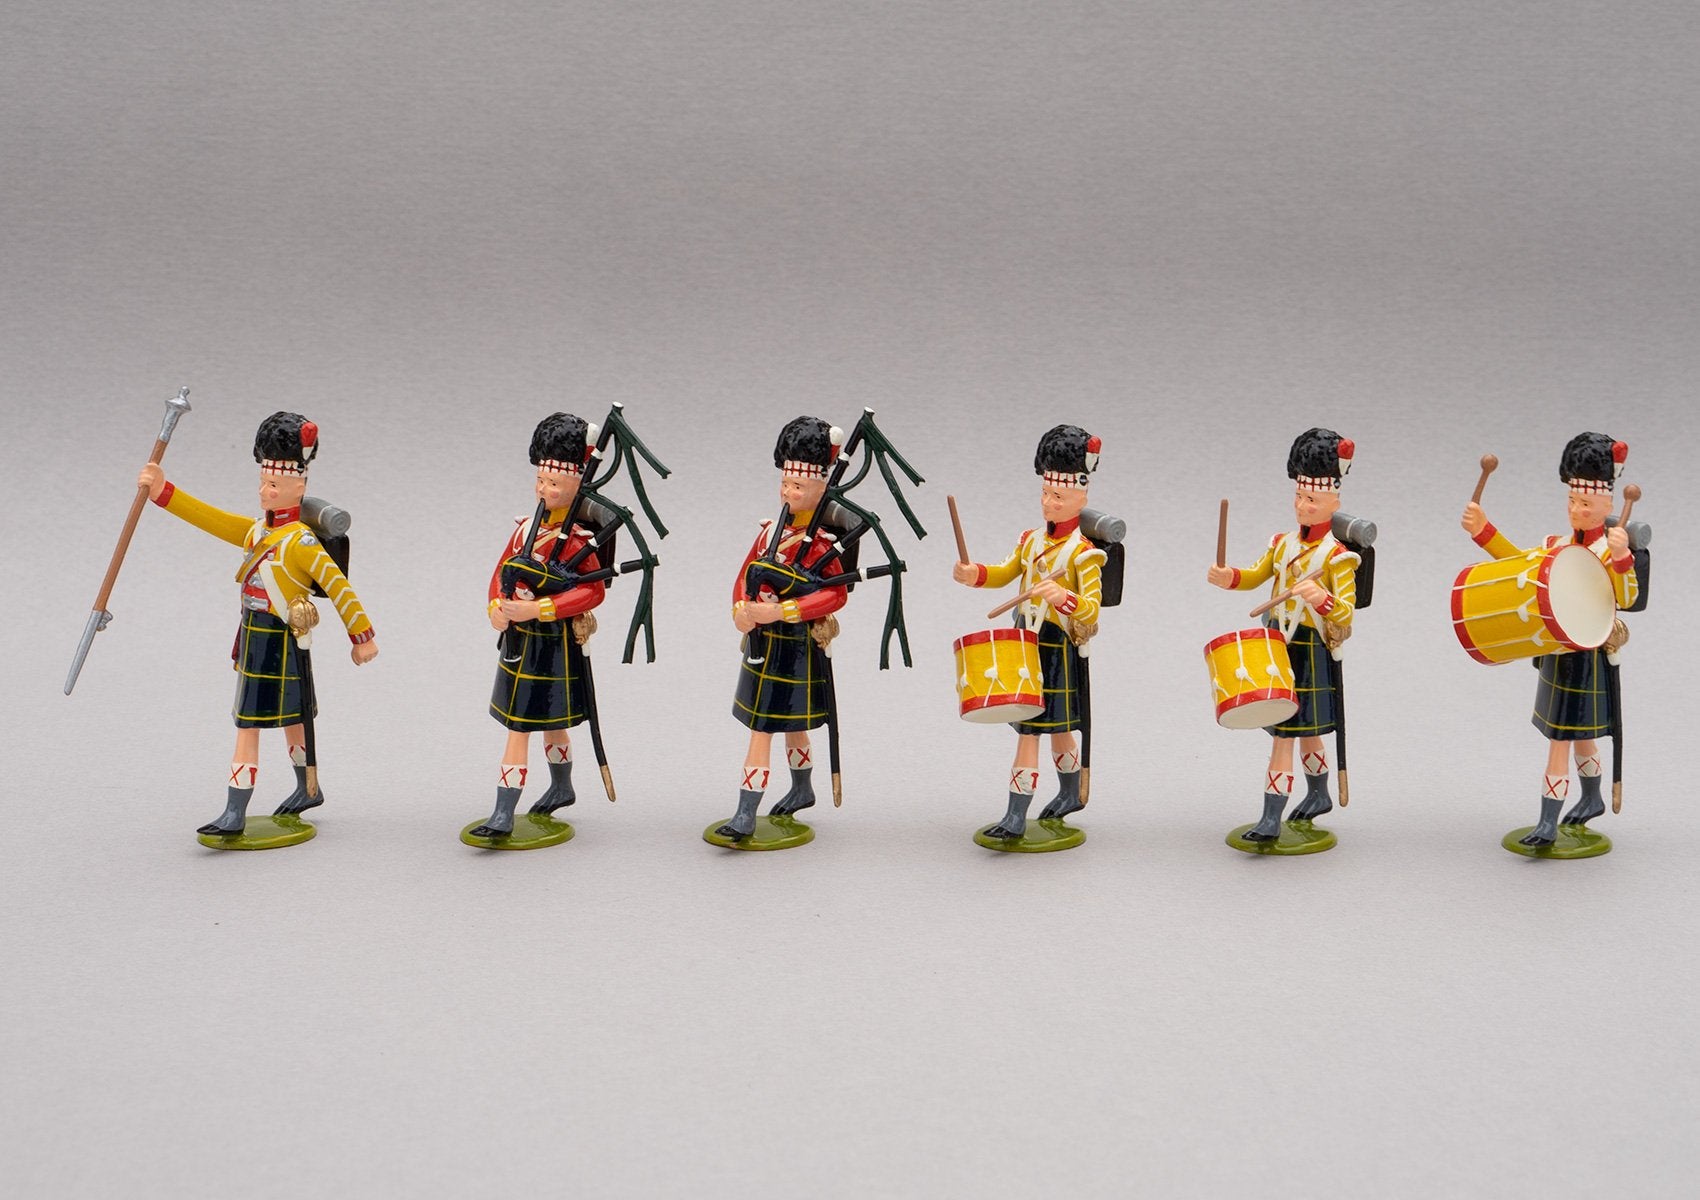 Set 121 Pipe band of the Gordon Highlanders, Waterloo 1815 | British Infantry | Napoleonic Wars | Gordon Highlanders Band, 1815. All wear the Highlander feather bonnet and Gordon tartan kilts. This set comprises a drum major, two pipers, and three drummers | Waterloo | © Imperial Productions | Sculpt by David Cowe